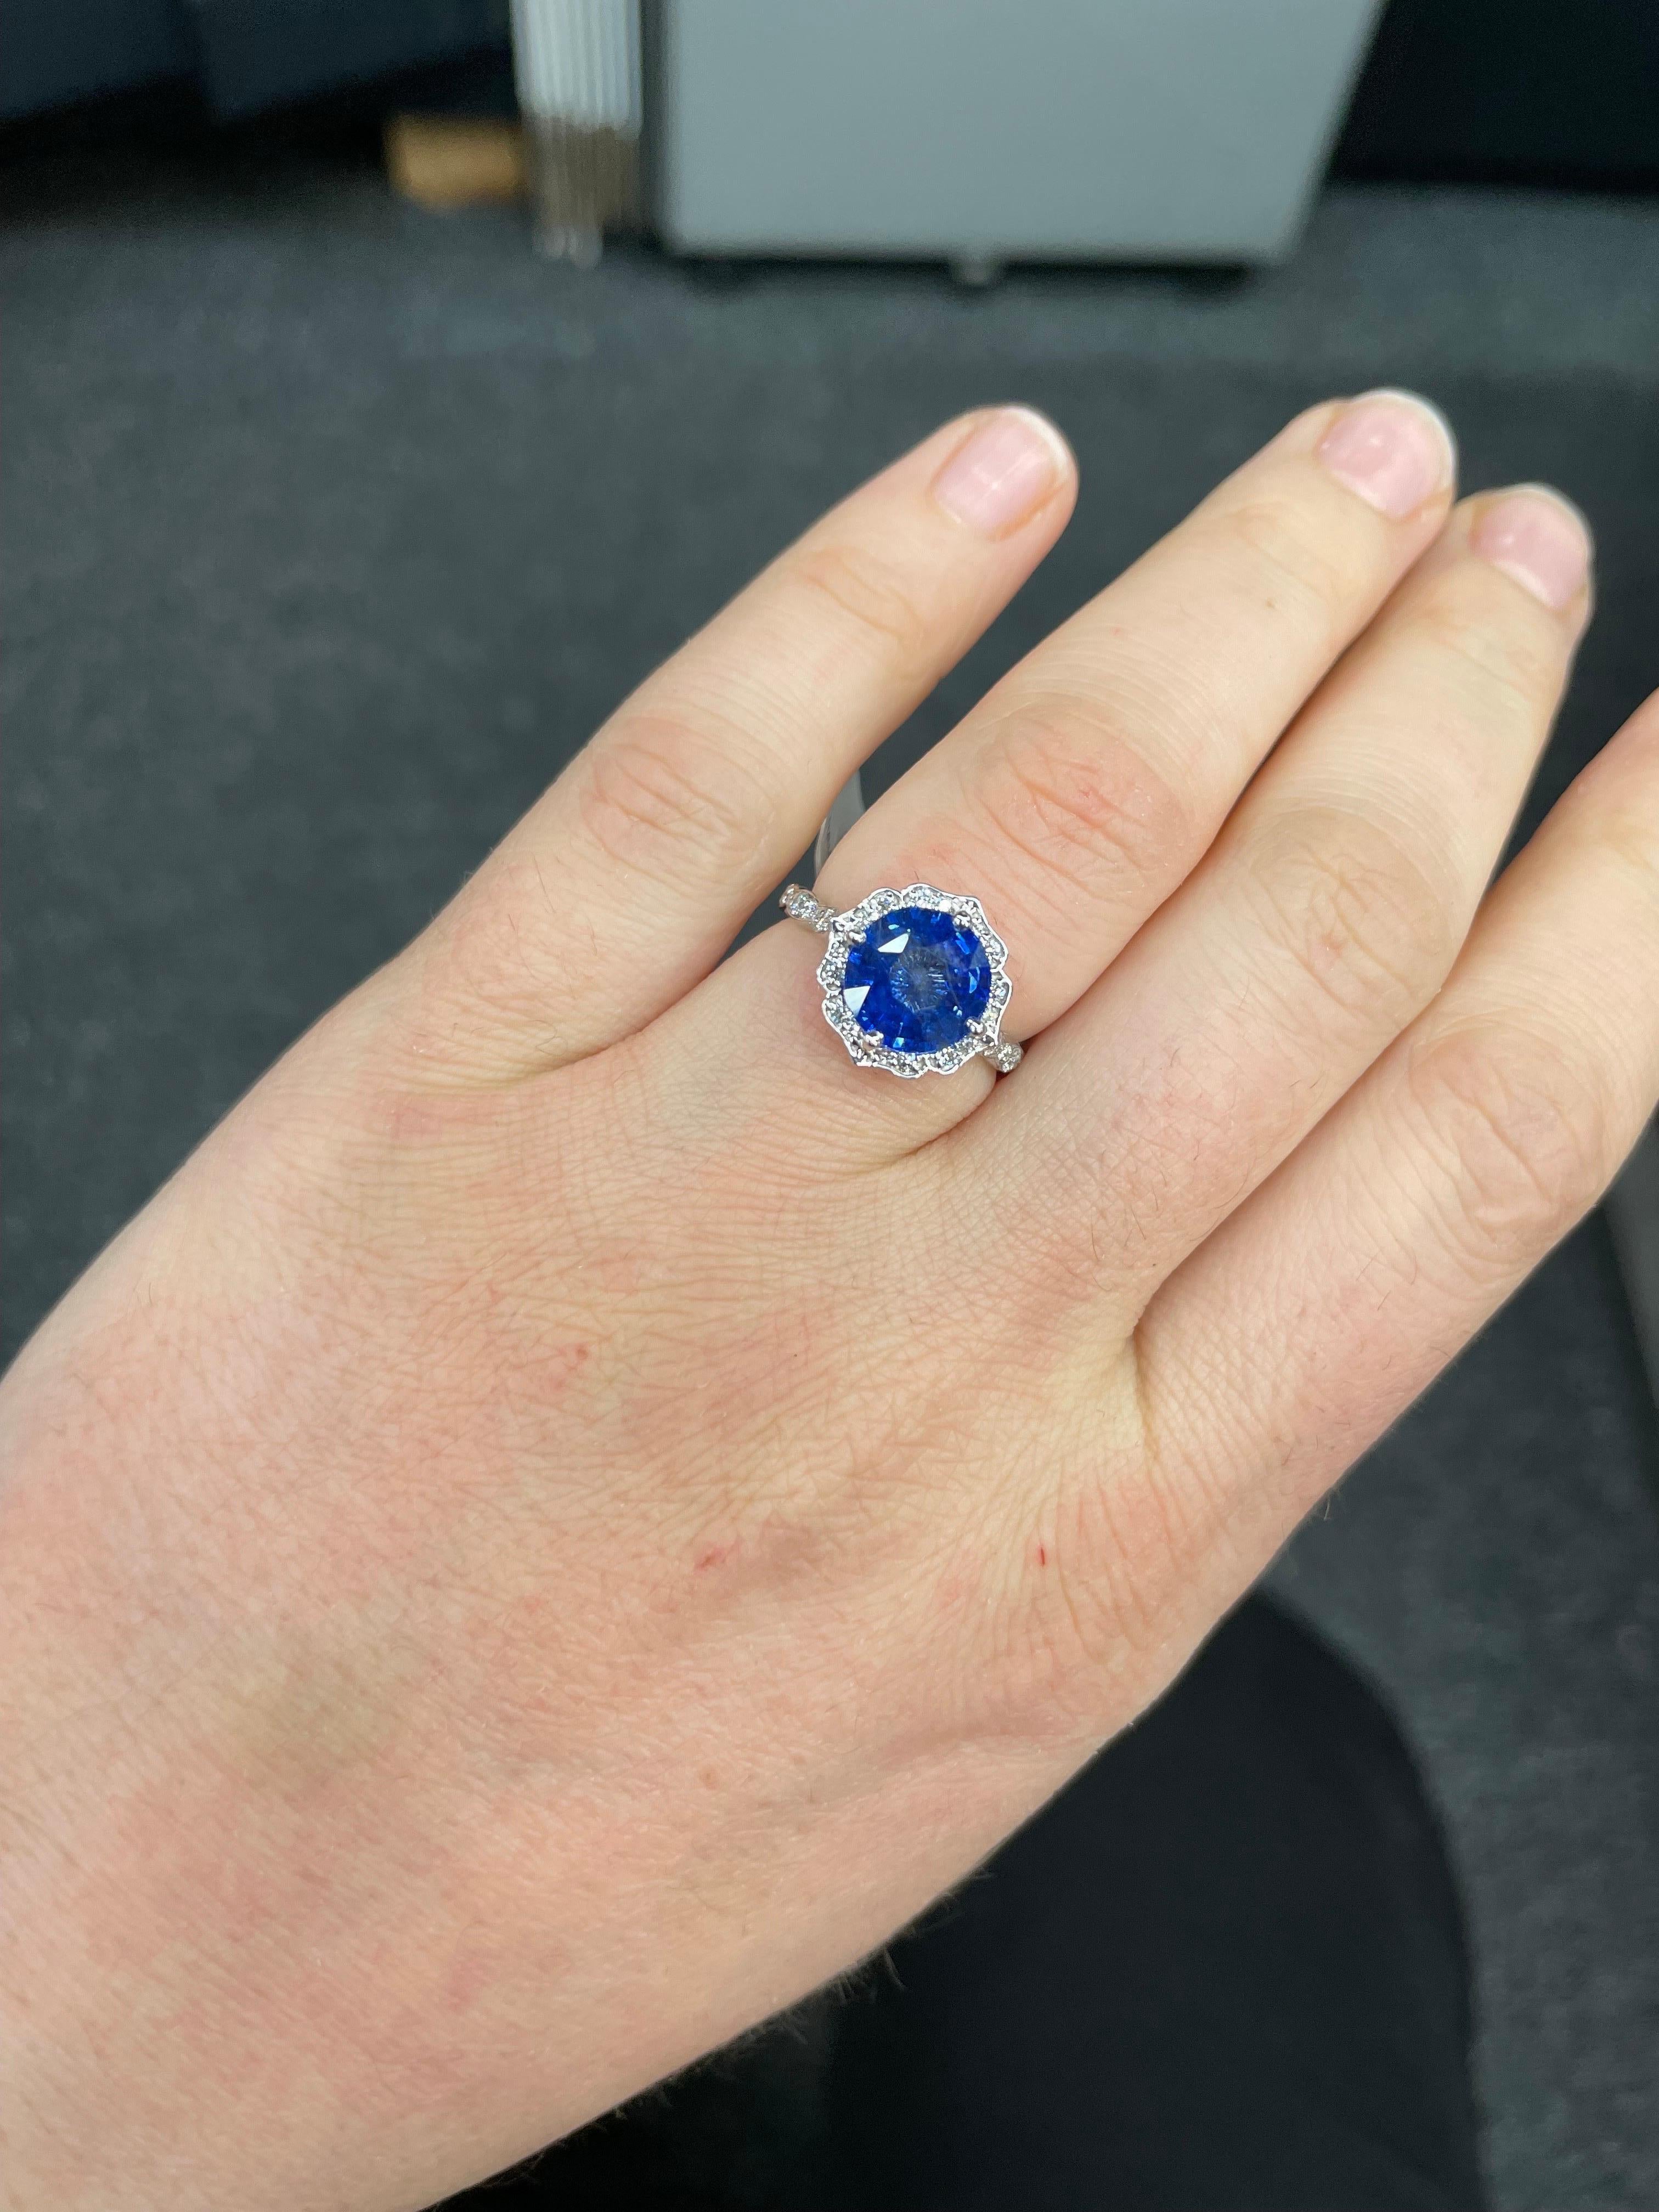 Antique Inspired Sapphire Diamond Halo Ring 4.07 Carats 14 Karat White Gold For Sale 3